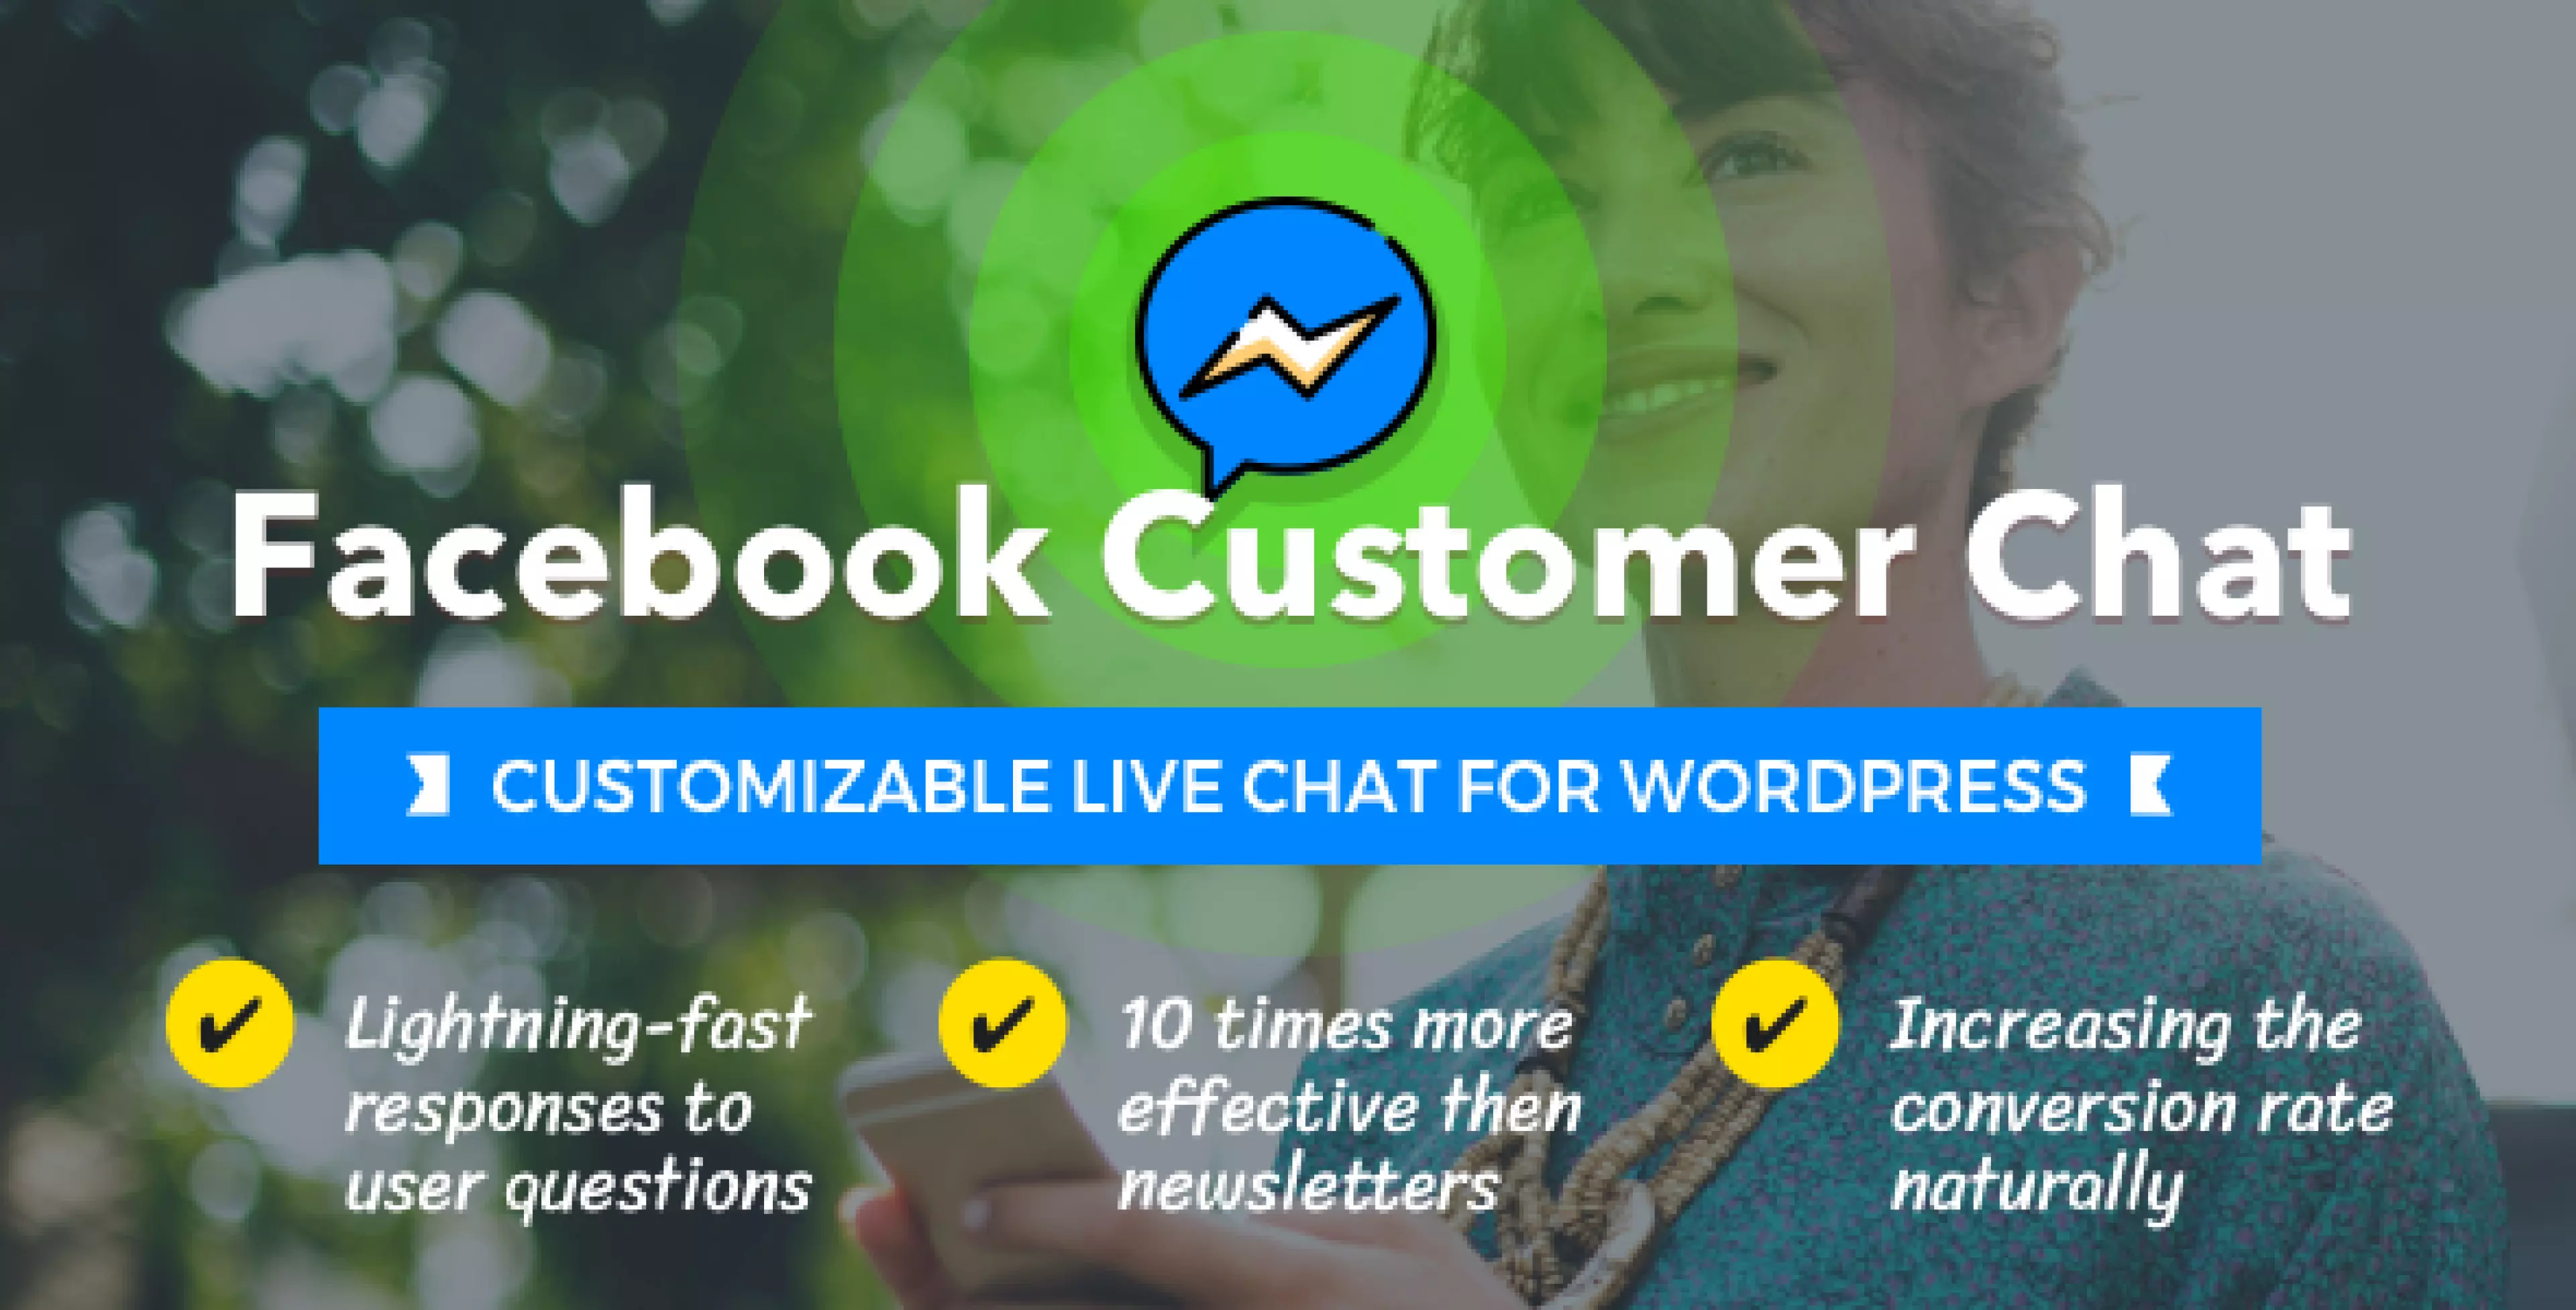 Facebook Customer Chat - Customizable Live Chat for WordPress 1627635483624